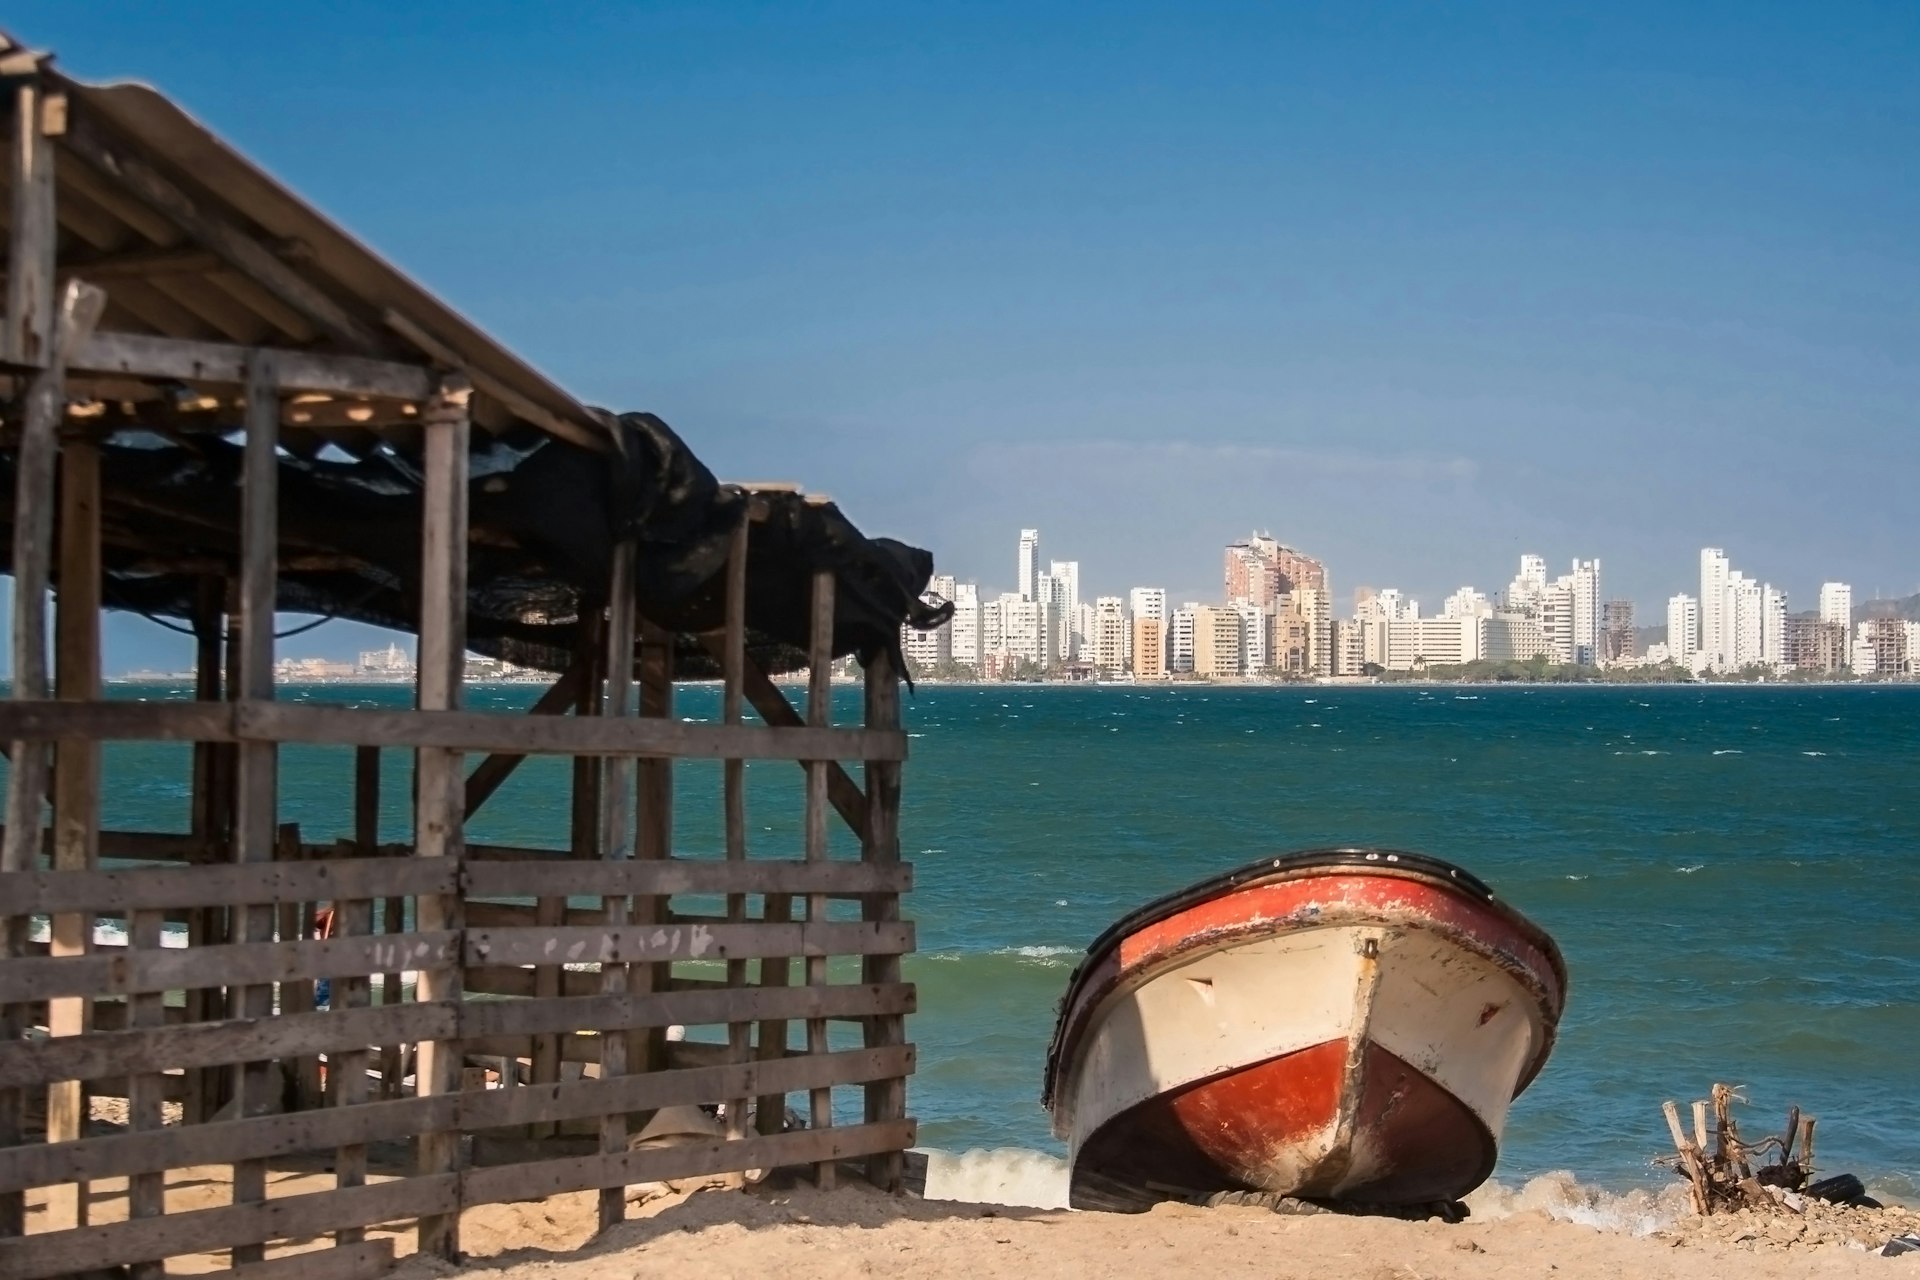 A boat rests on a sandy beach. A city skyline with high-rise buildings is in the distance across the water